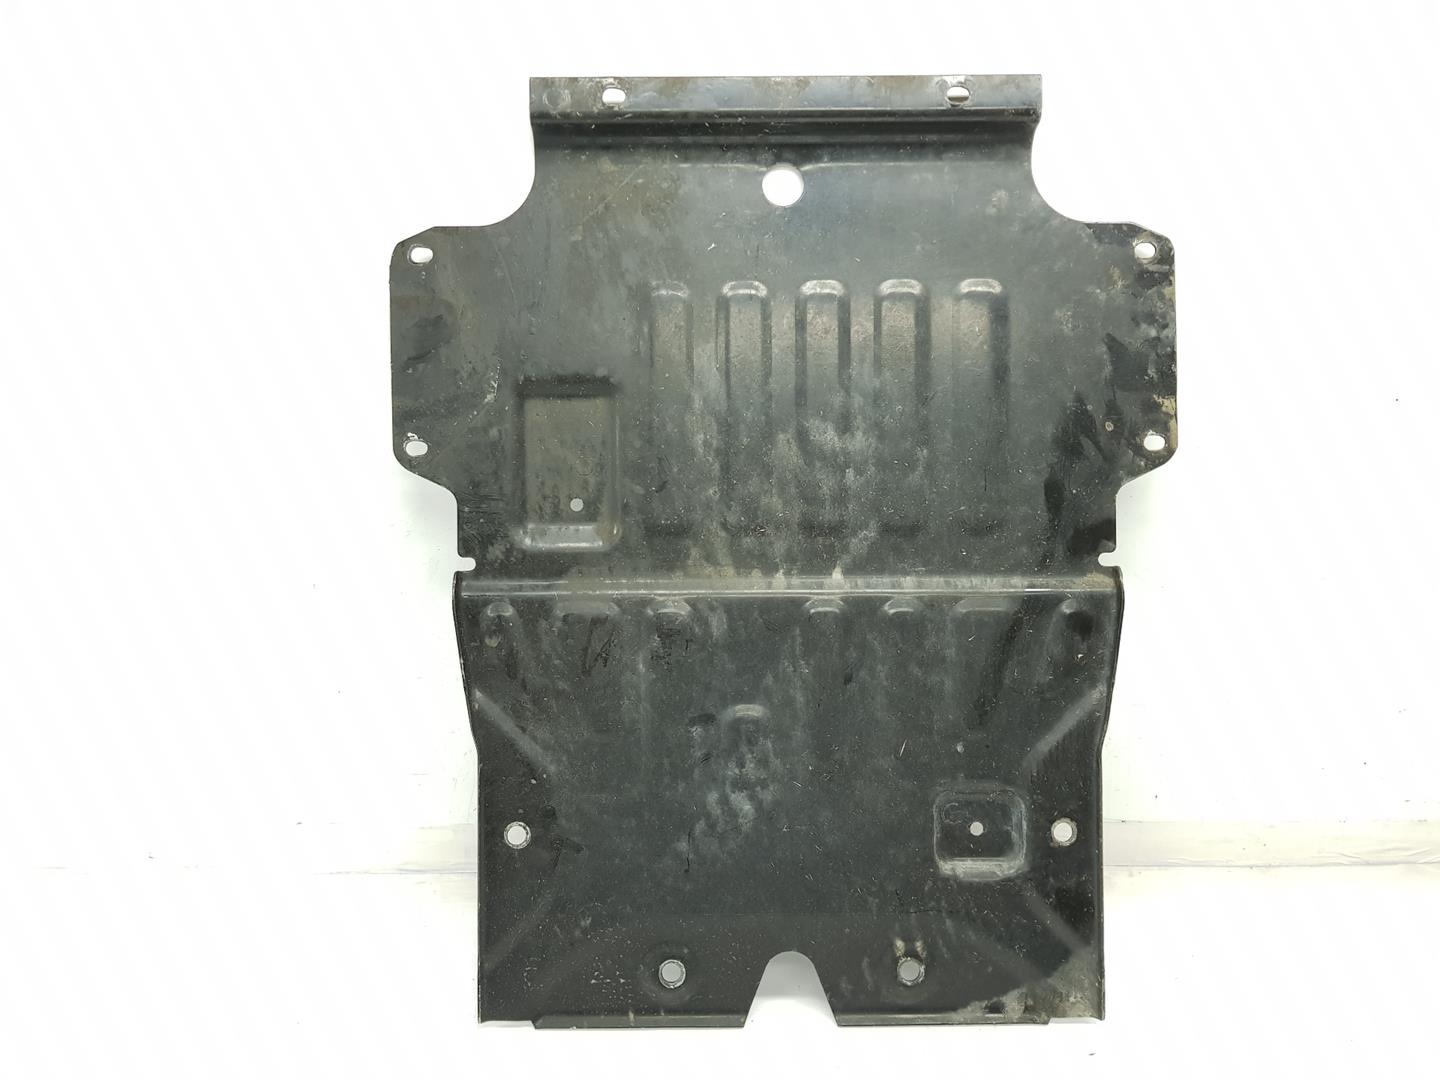 LAND ROVER Discovery 3 generation (2004-2009) Front Engine Cover LR014235, AH325F002AA 24216581